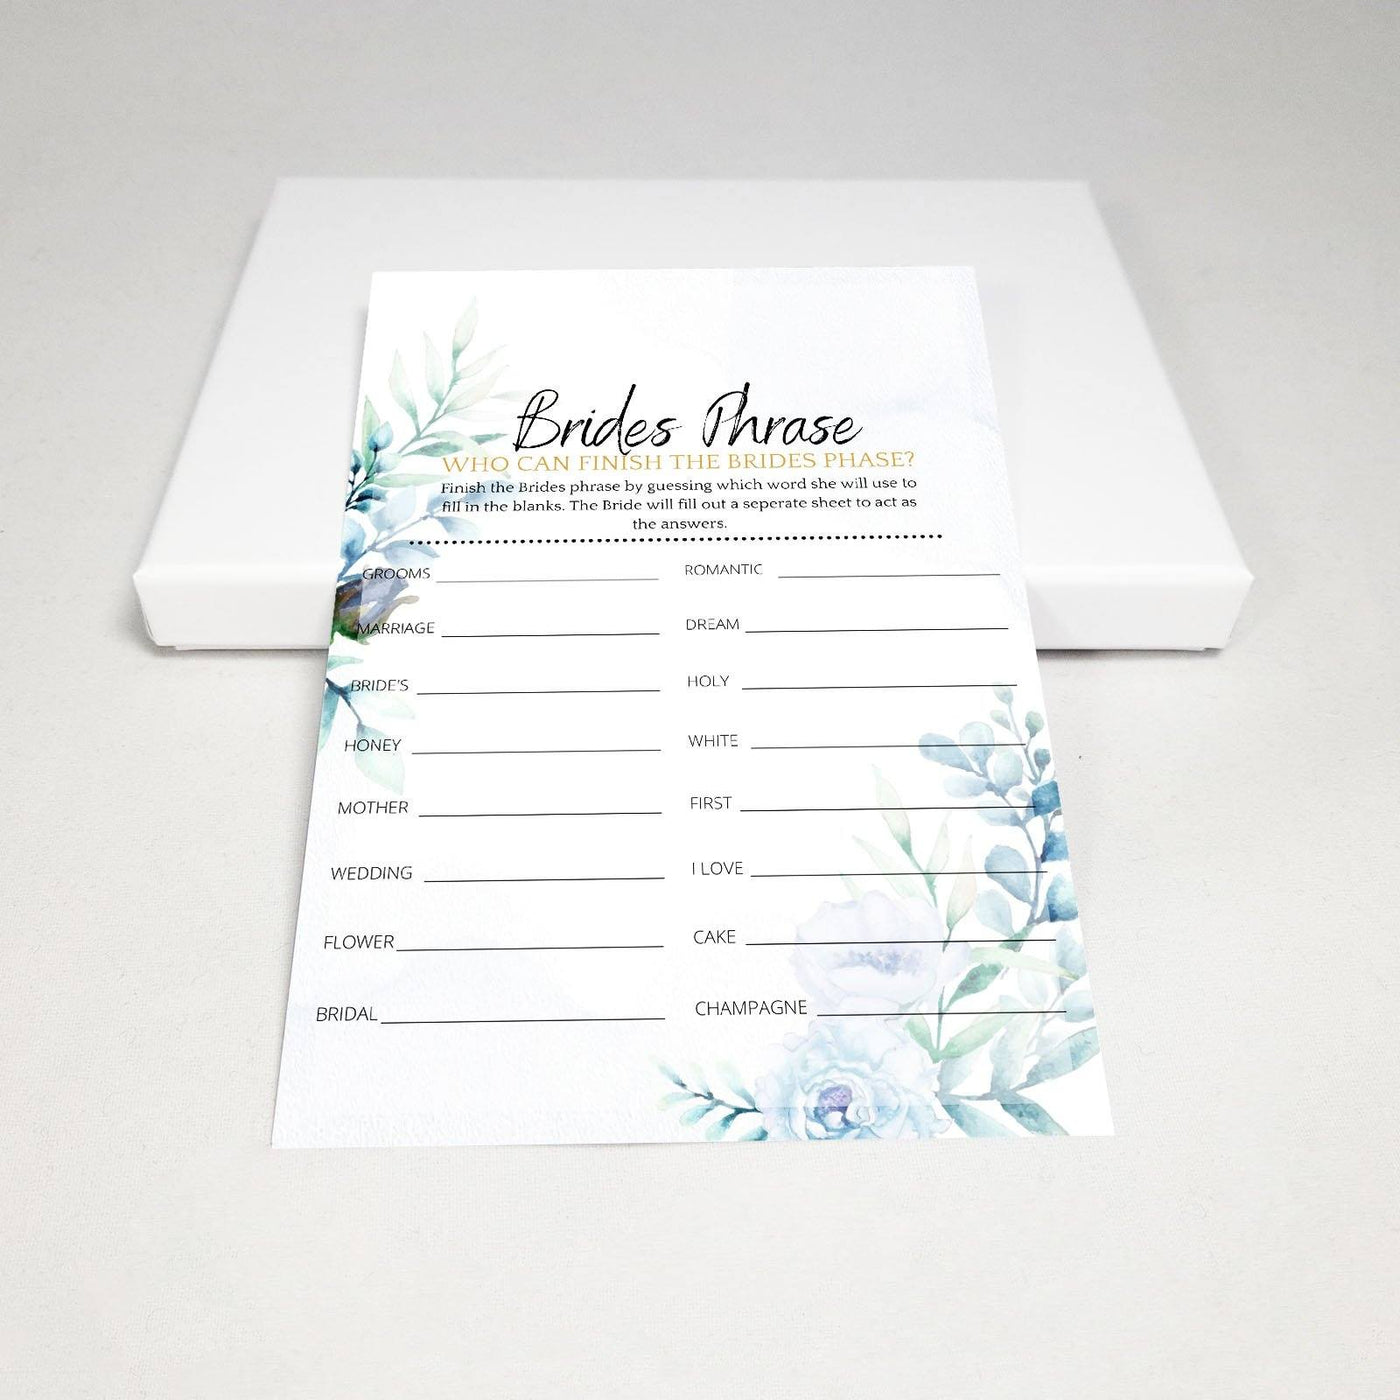 Watercolor Meadow - Finish The Brides Phrase | Bridal Shower Game Party Games Your Party Games 